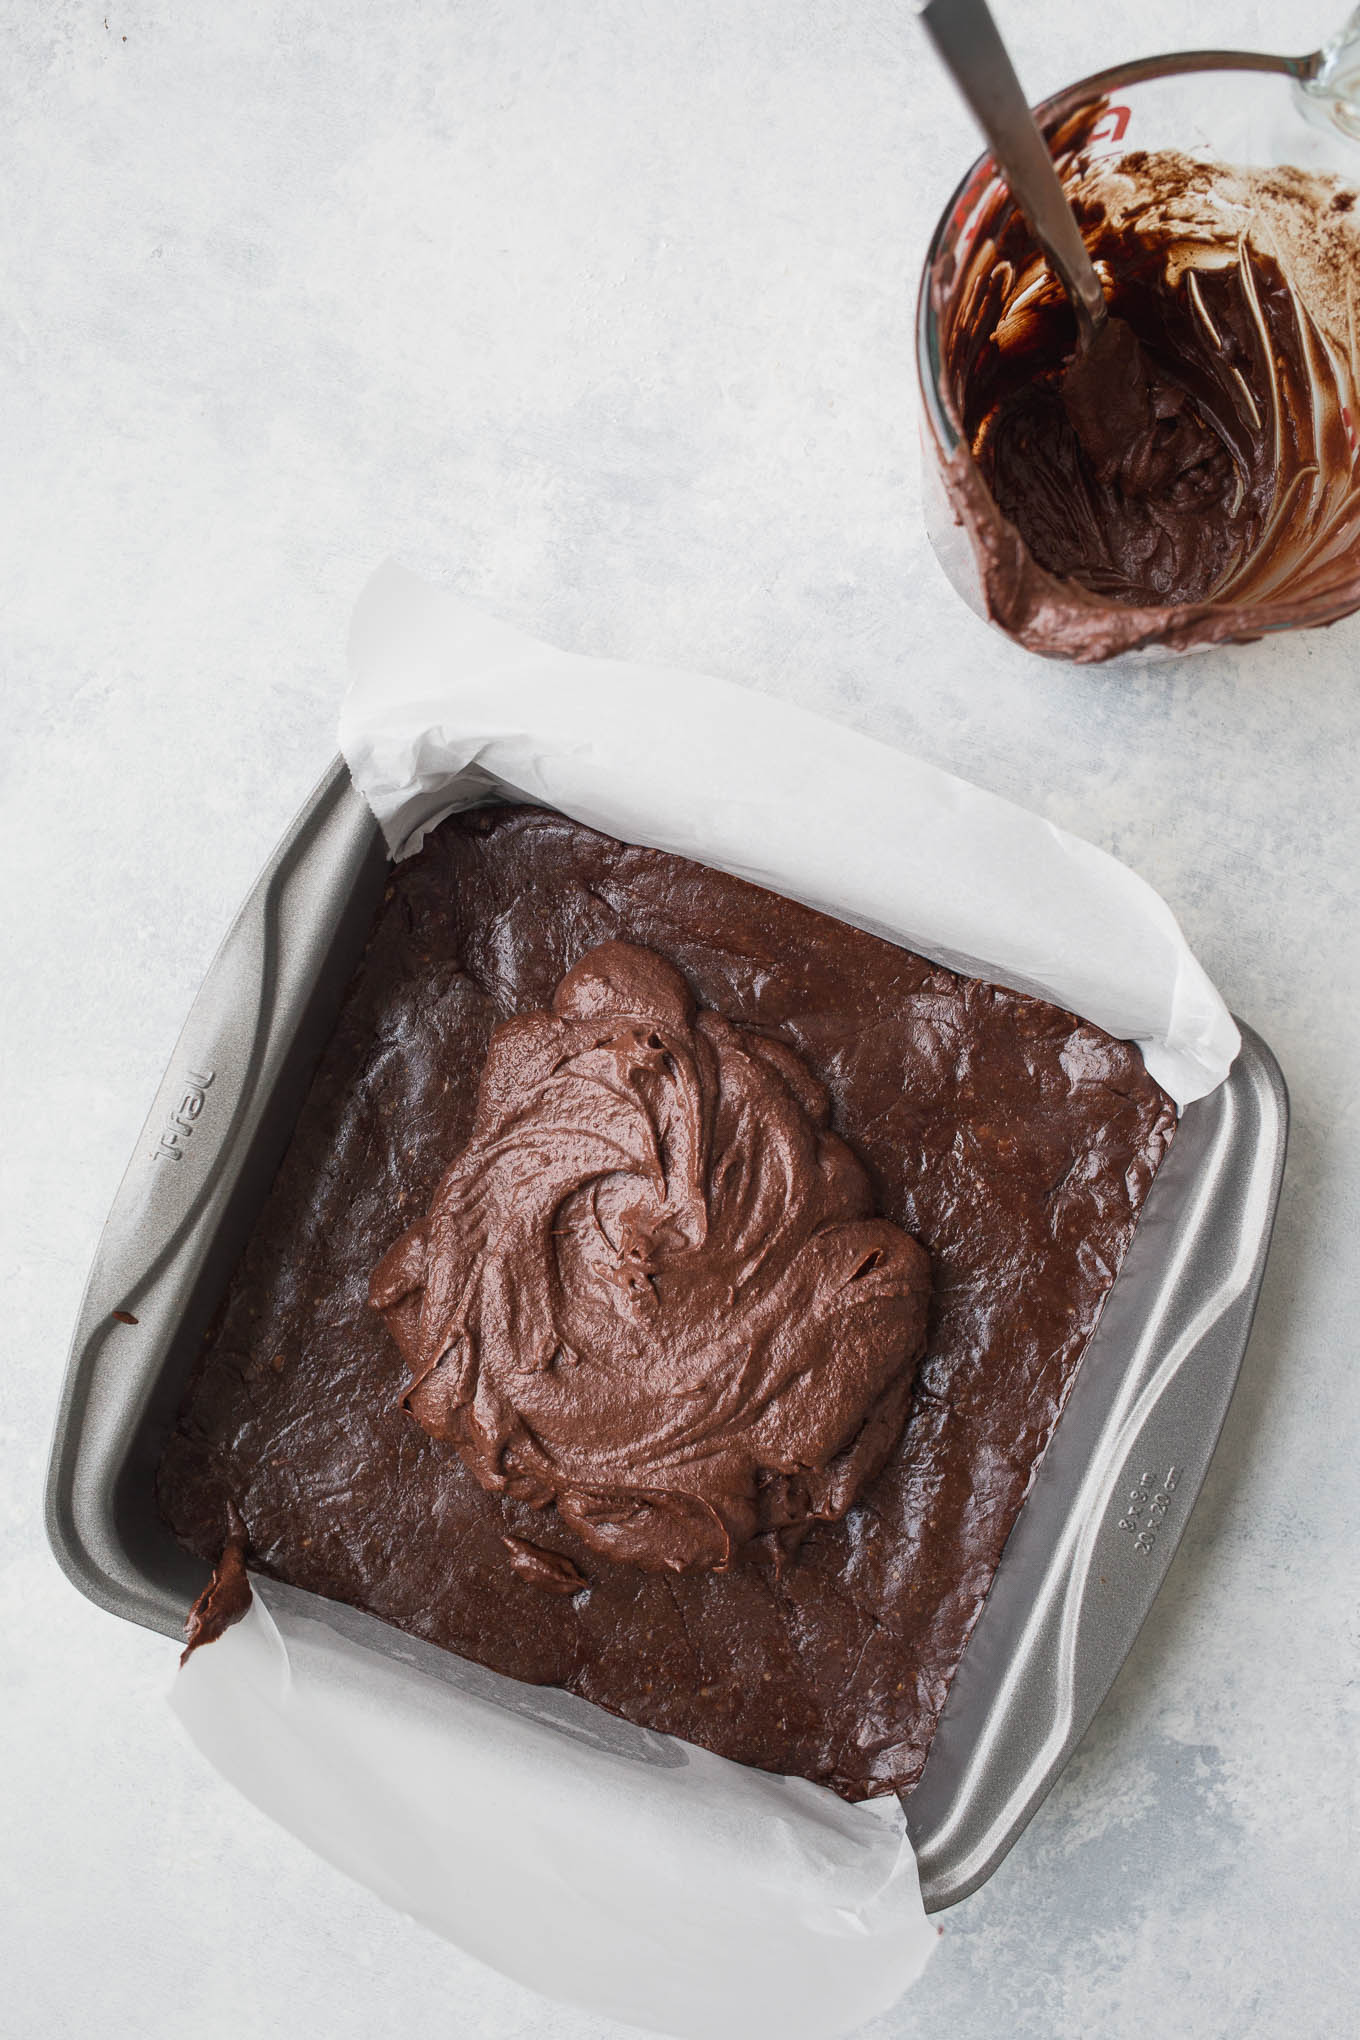 No-bake, raw chocolate brownies made with a layer of hemp seeds, walnuts, cocoa, and dates, topped with a delicious chocolate ganache frosting. Gluten-free, vegan, and refined sugar-free. 